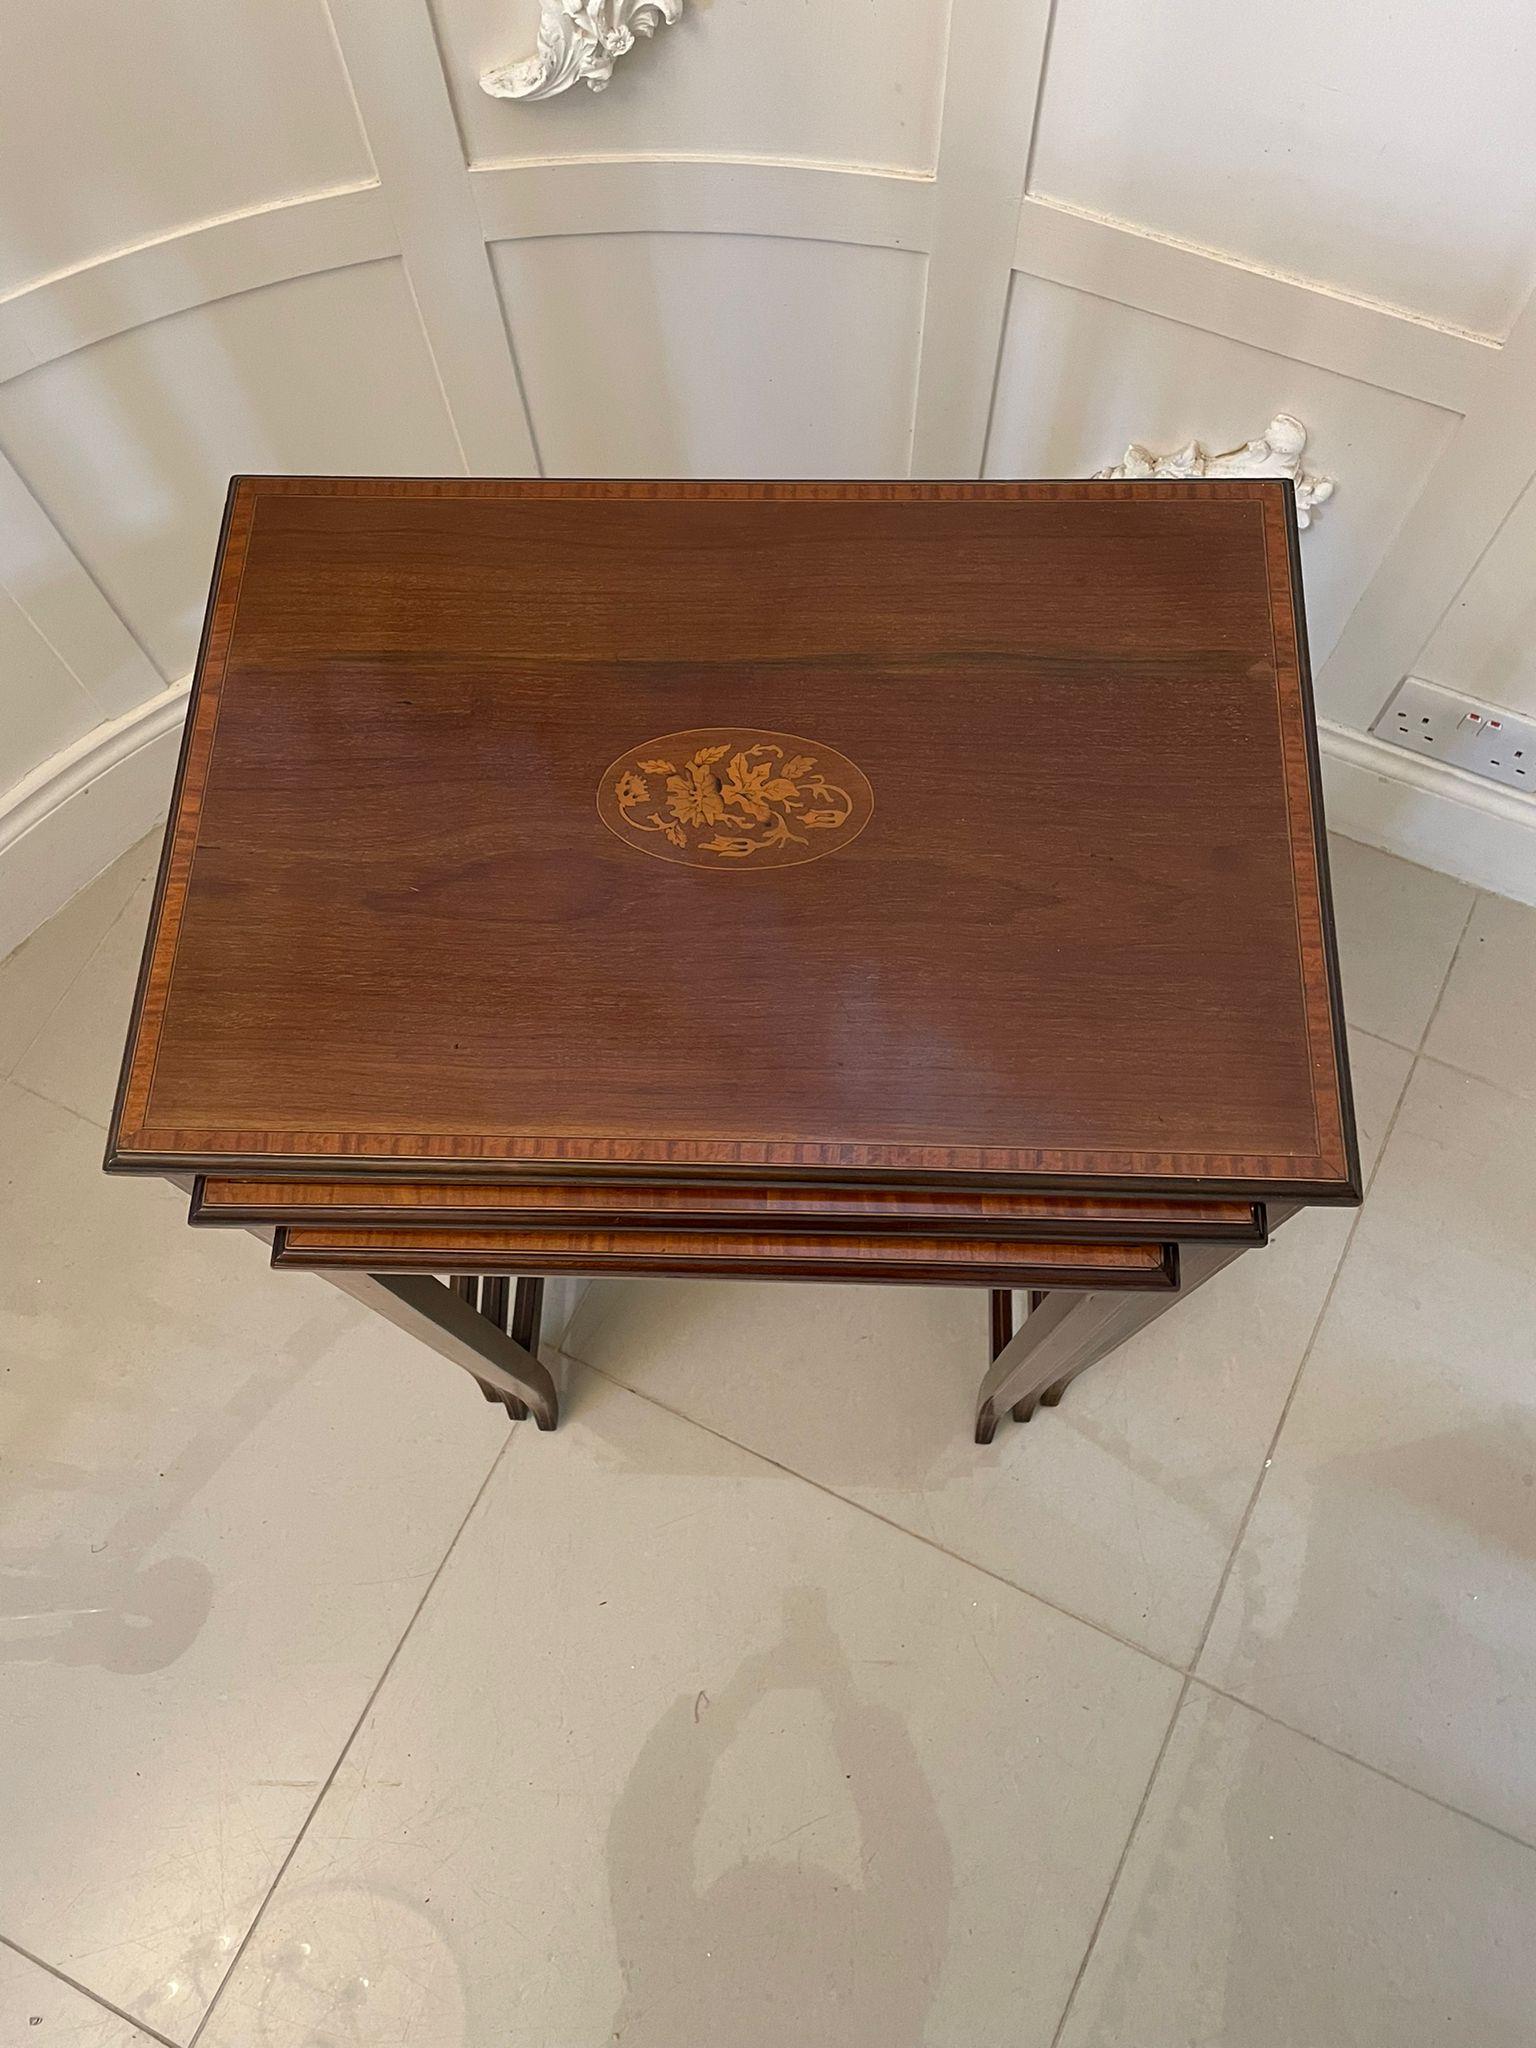 Antique Edwardian quality mahogany inlaid nest of three tables having quality pretty mahogany inlaid and satinwood crossbanded tops standing on square mahogany inlaid tapering legs united by inlaid mahogany stretchers.

Measures: H 73.5 x W58 x D